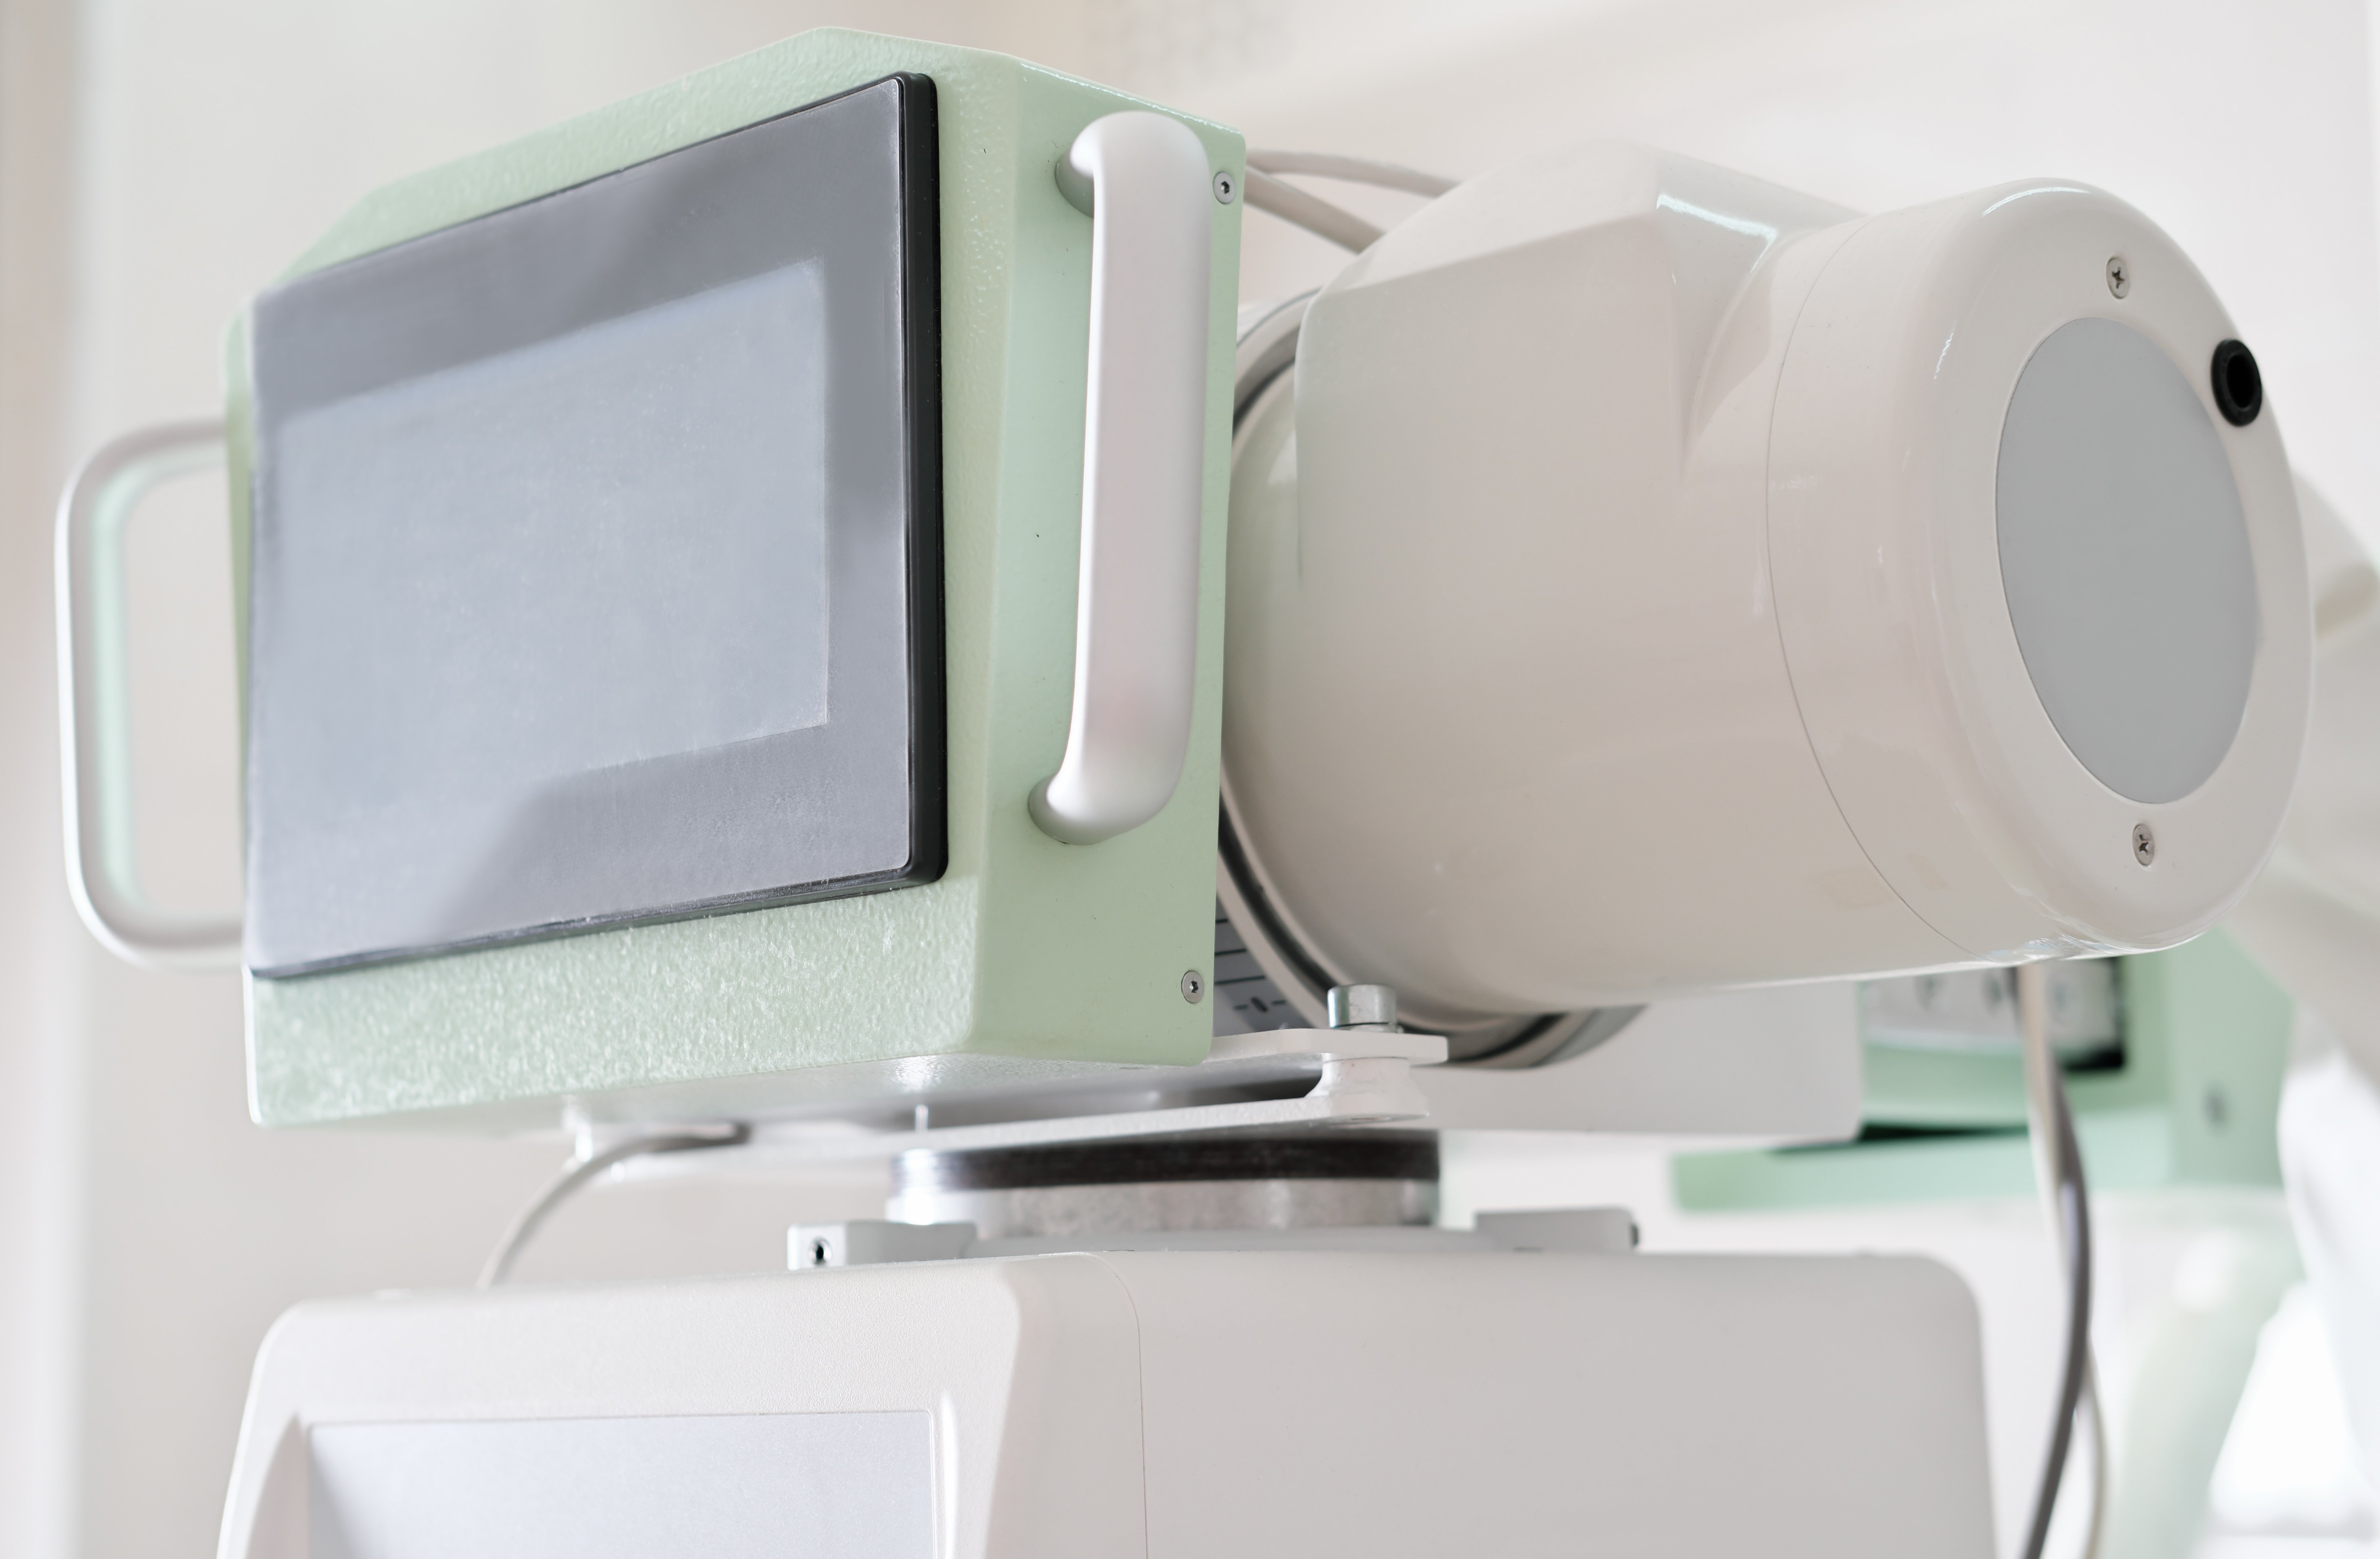 MRIs and Imaging Procedures: Never Pay More Than You Have To